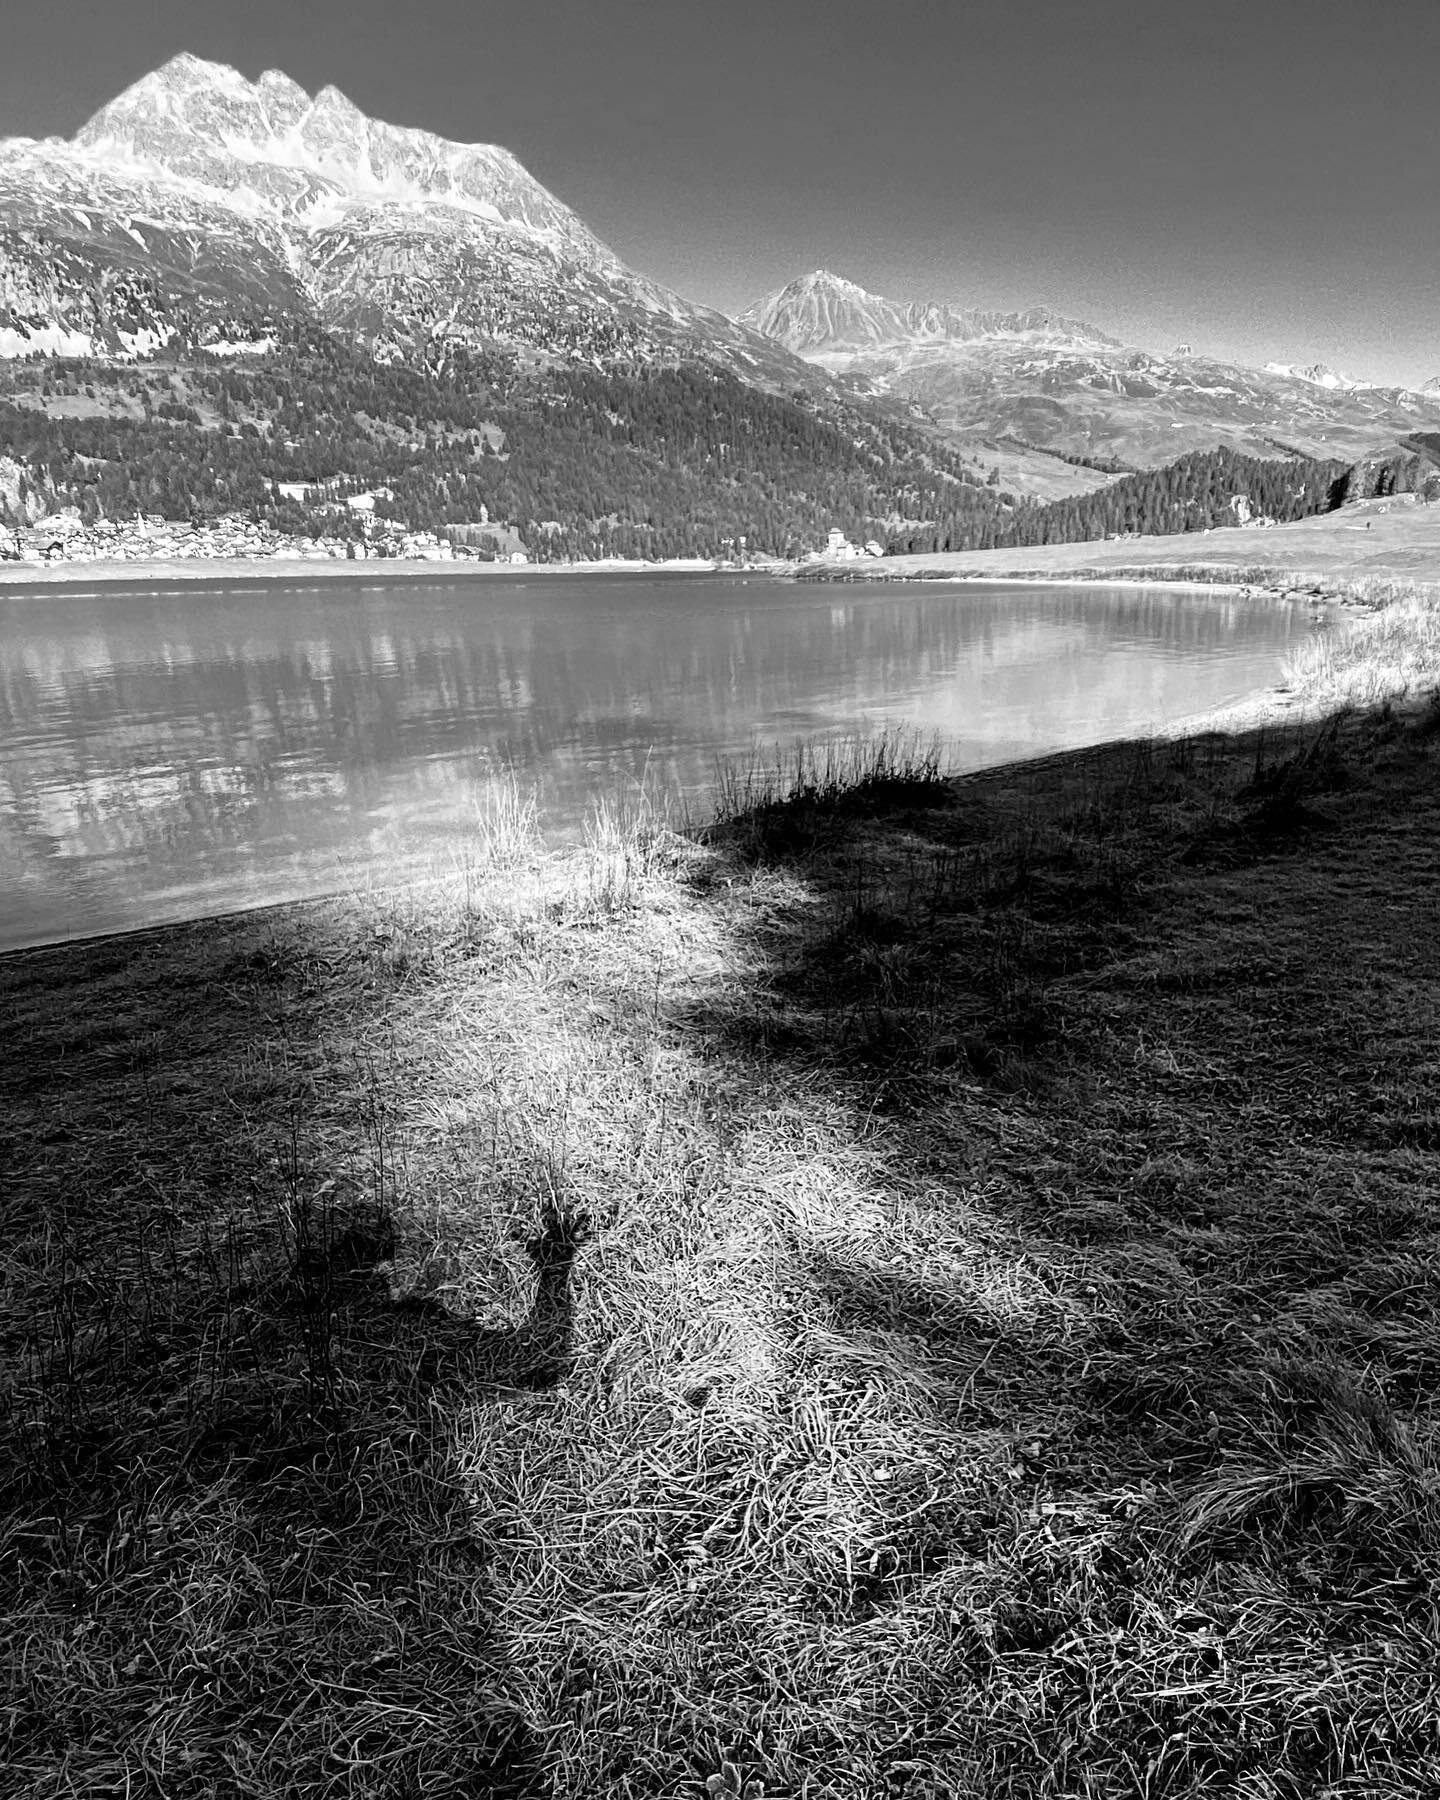 Running with my Ghosts 

#morningrun #myghosts #shadowplay #lightplay #firn #silvaplana #engadin #pizjulier #piznair #switzerland #tombauerphotography #createurimages